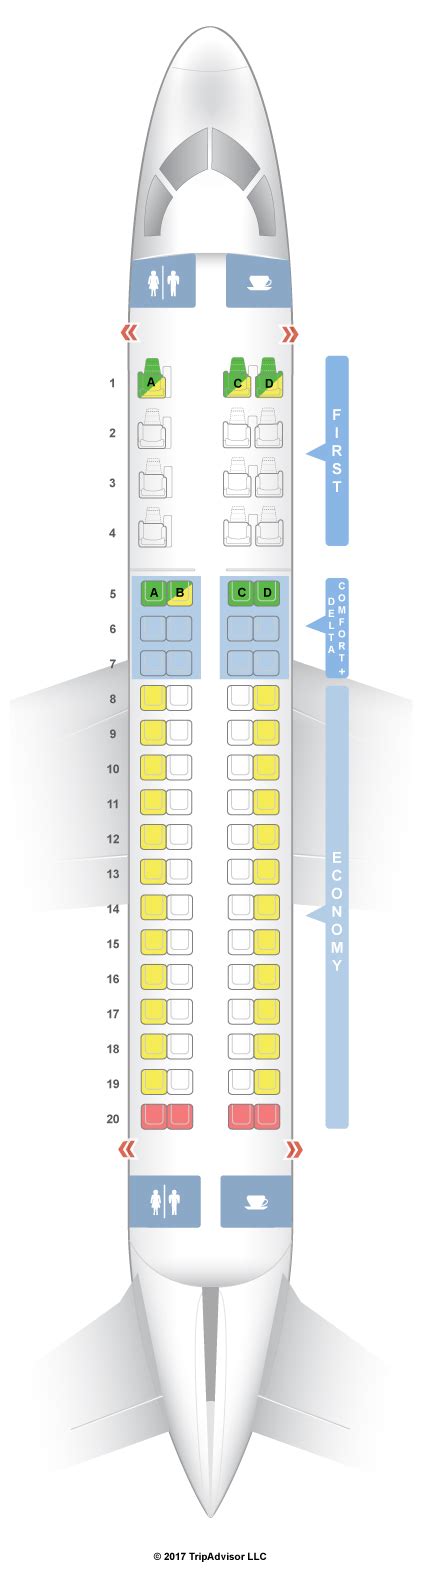 For your next Air Canada flight, use this seating chart to get 